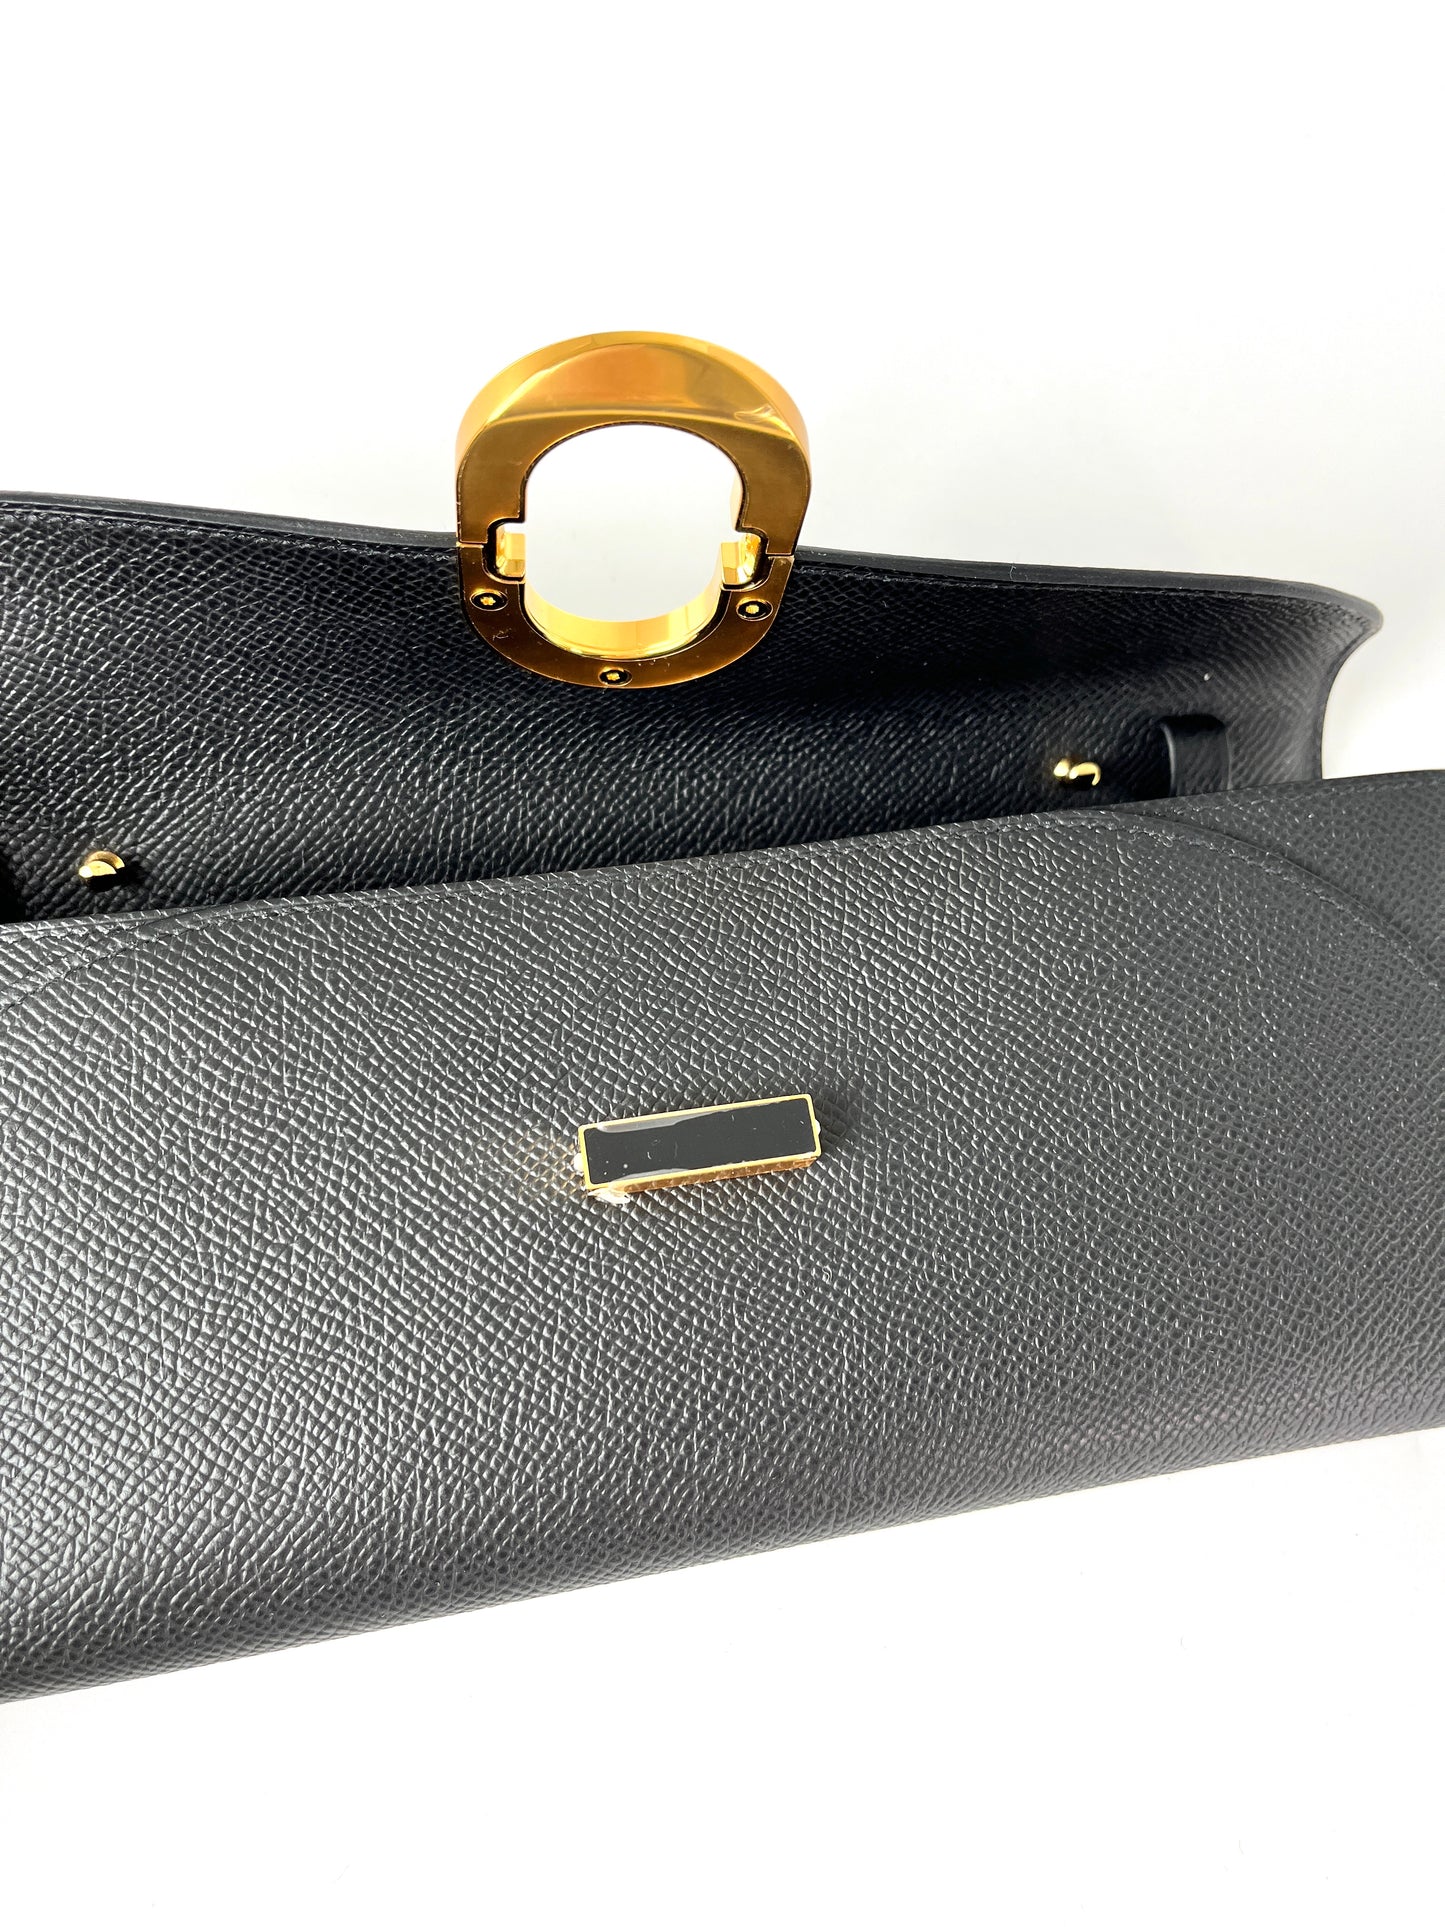 New HERMES Black Gold Chaine D’Ancre Wallet To Go Clutch Crossbody Bag